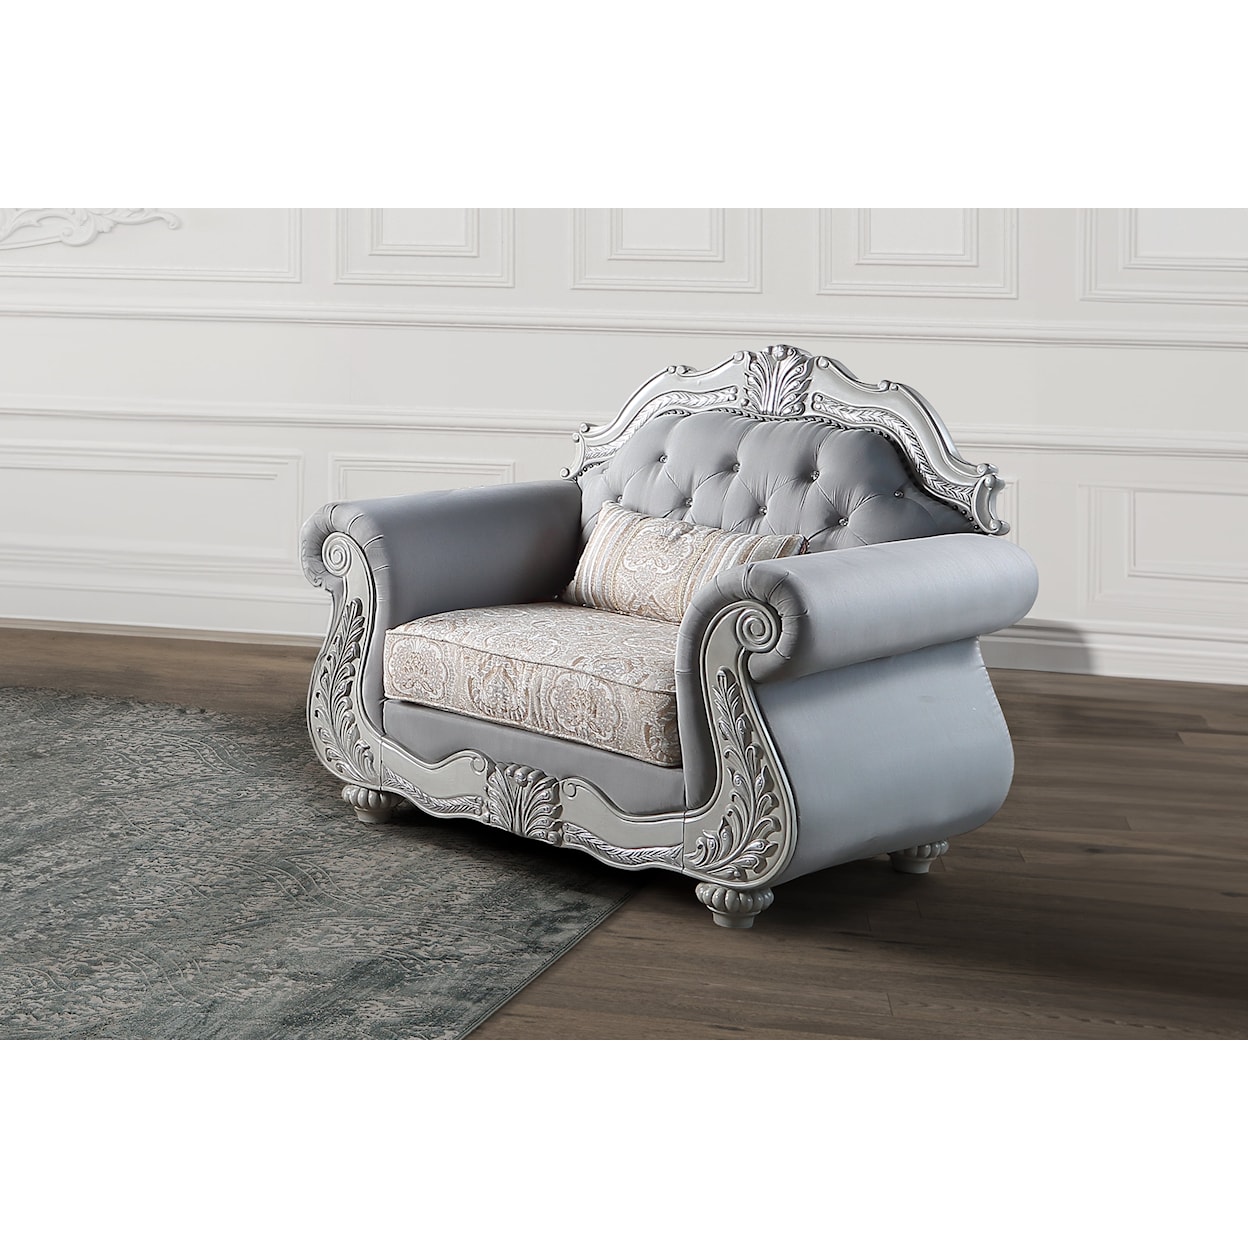 New Classic Furniture Cambria Hills Upholstered Chair